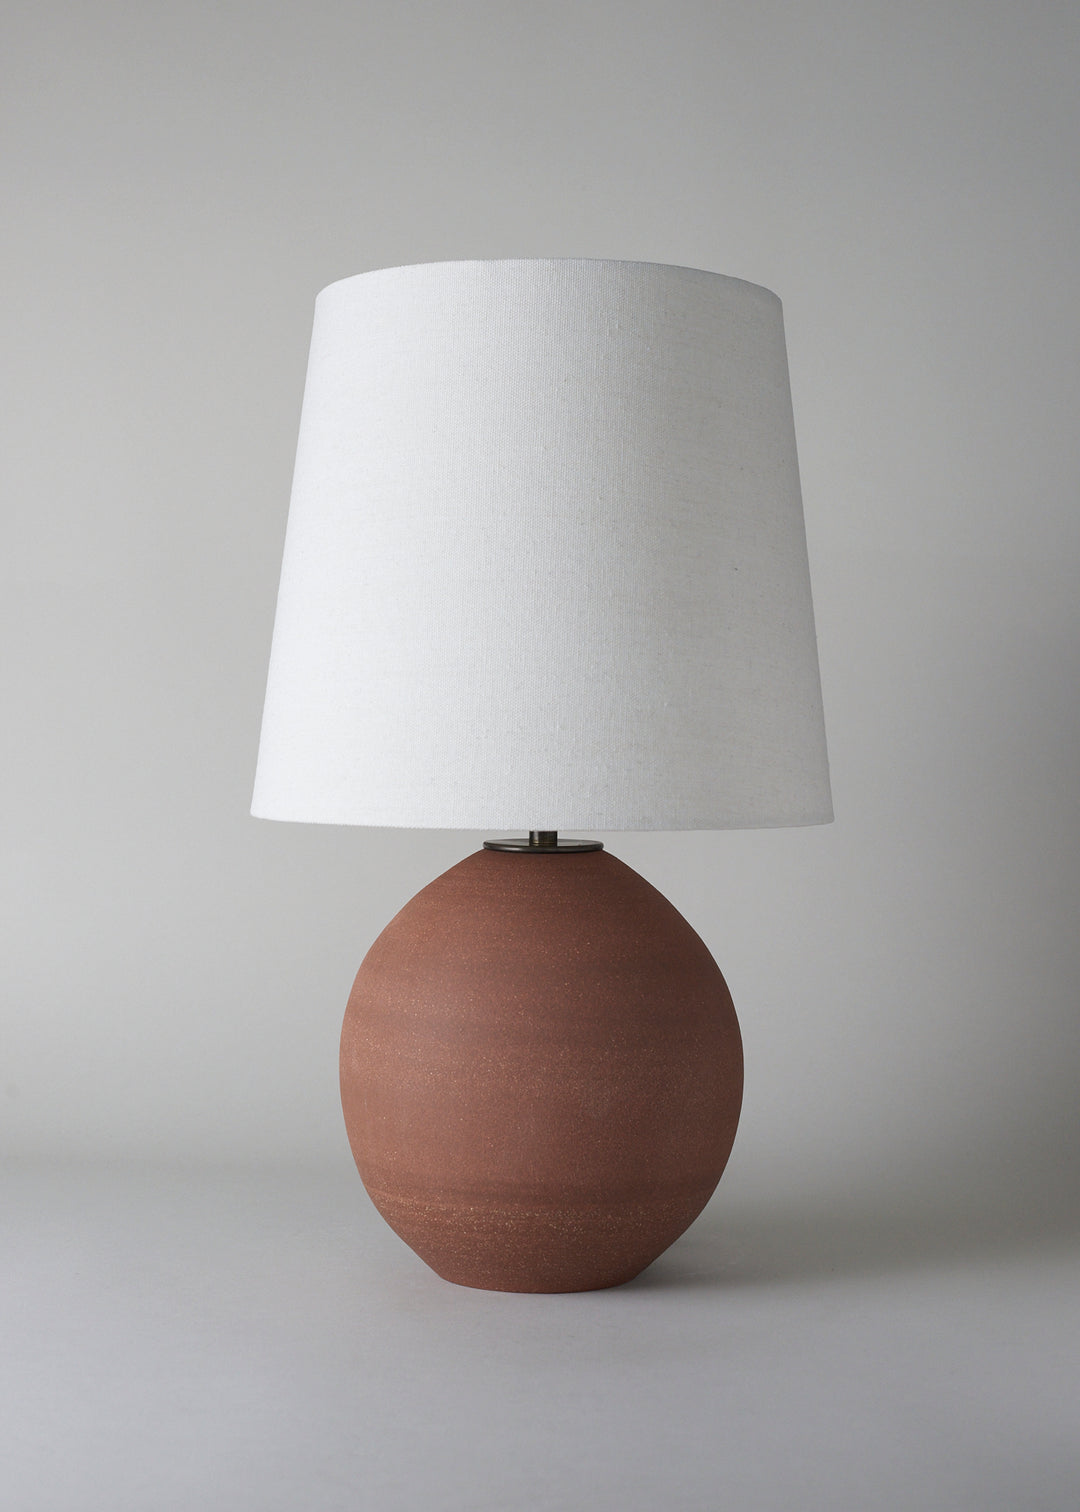 Small Orb Lamp in Terracotta - Victoria Morris Pottery